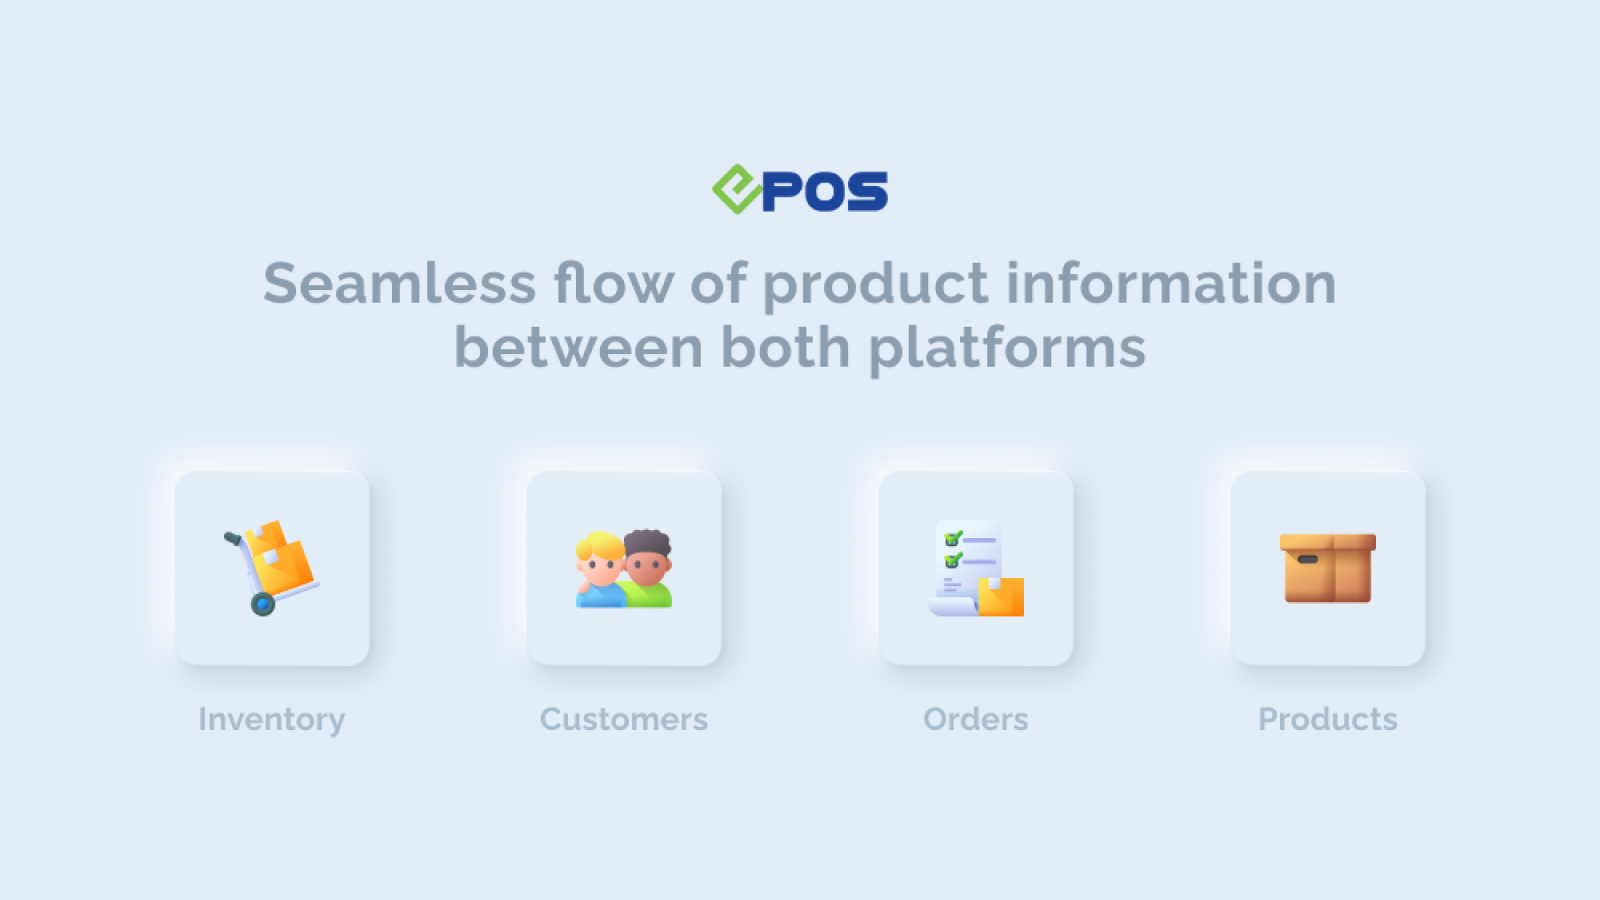 Seamless flow of product information between both platforms